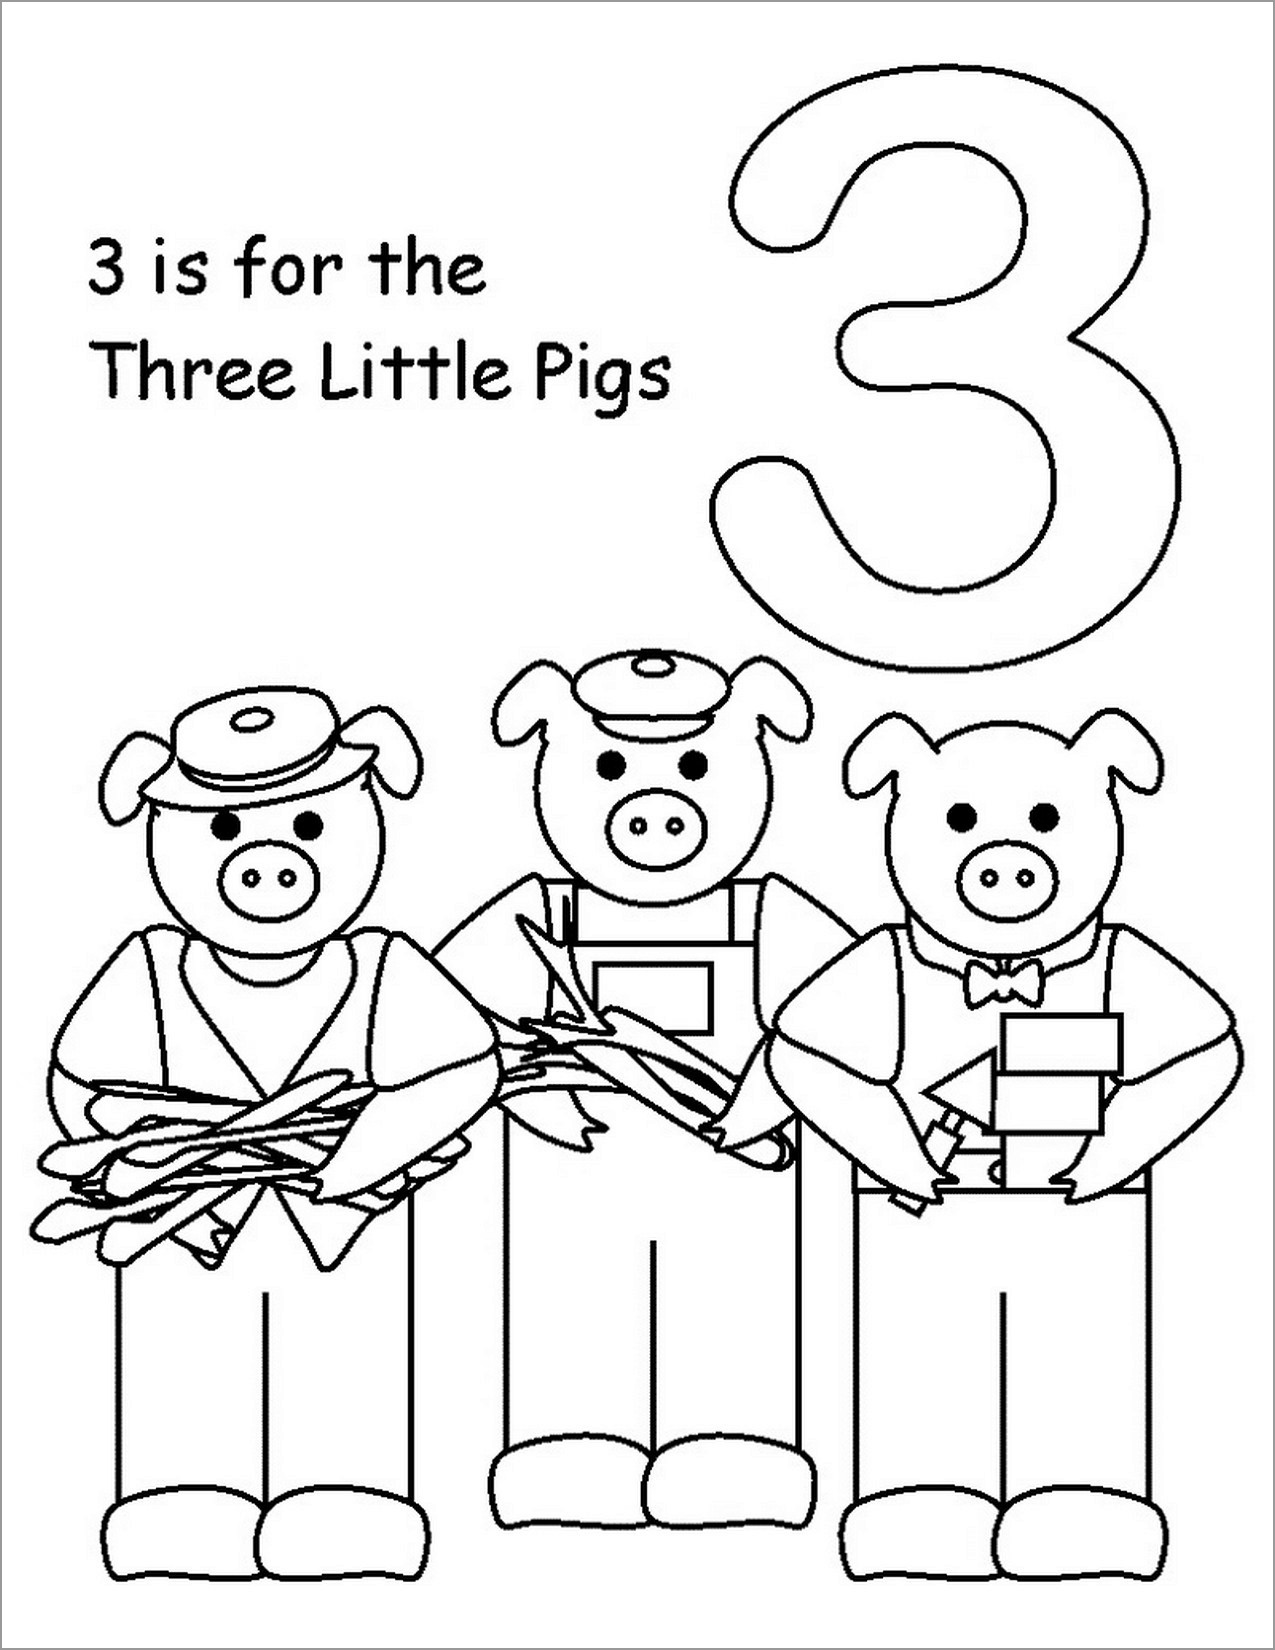 3 Little Pigs Coloring Pages